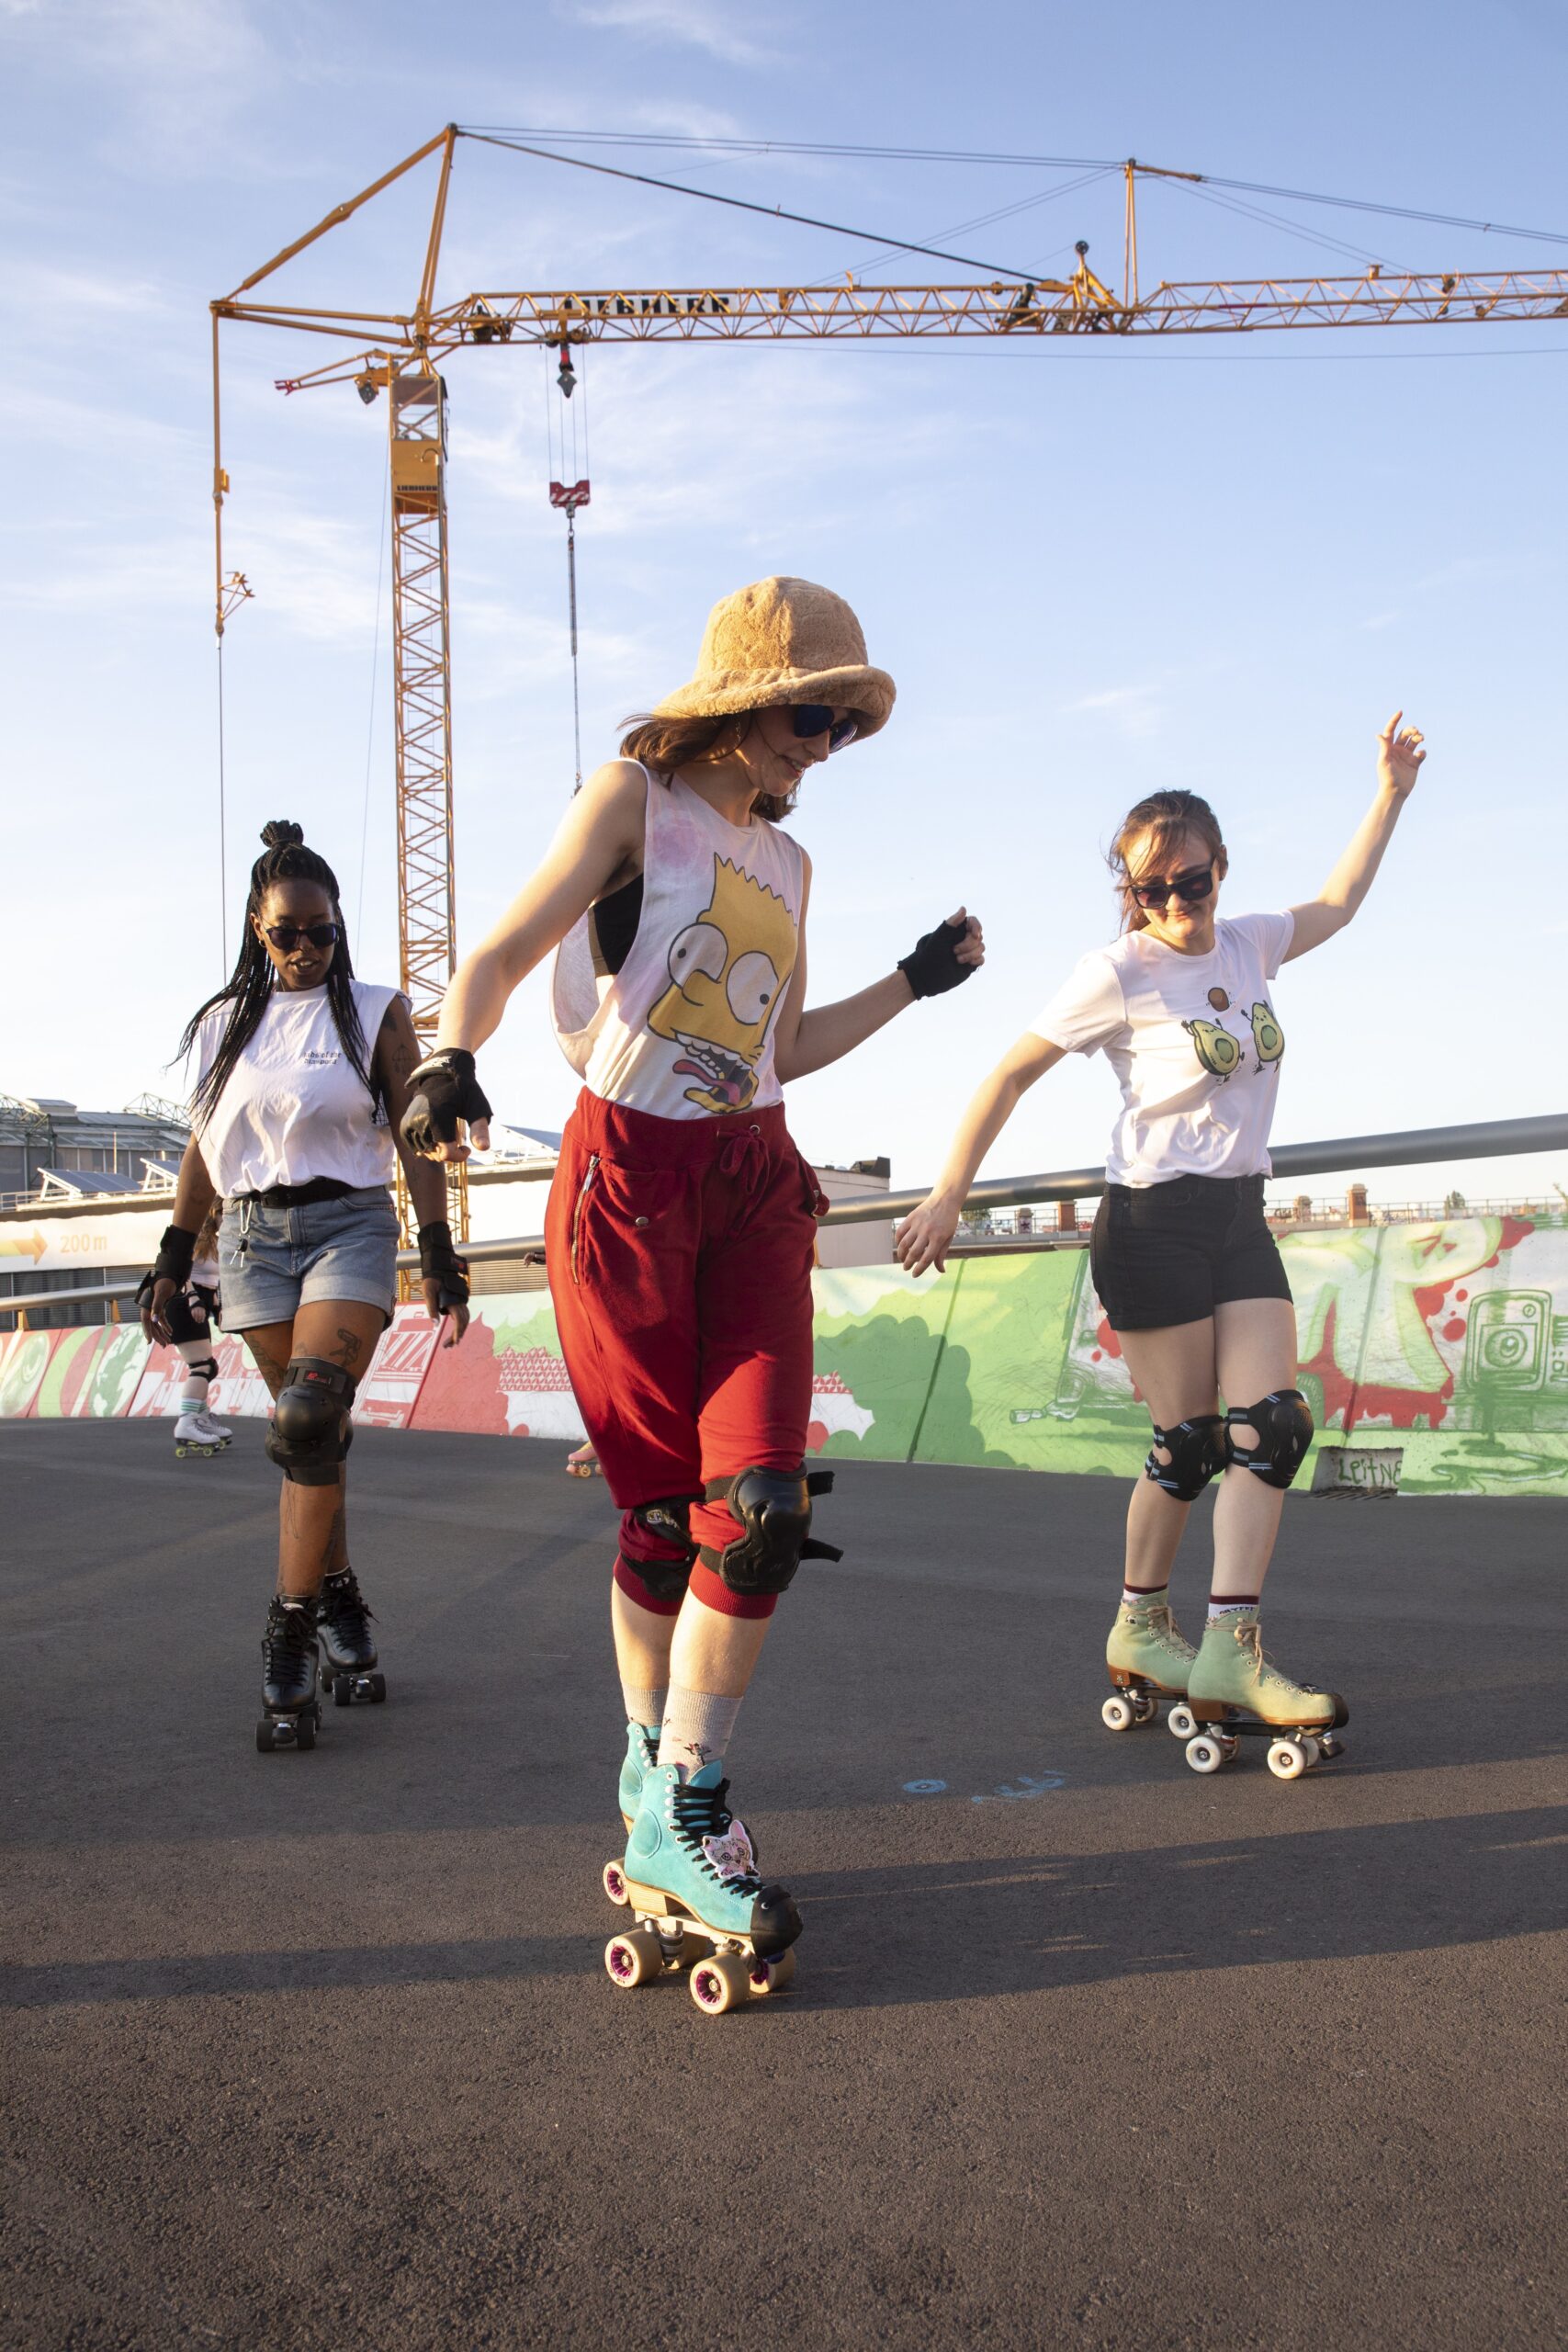 Featured image for “Skate Meetup Spittelau, 25.6.24”